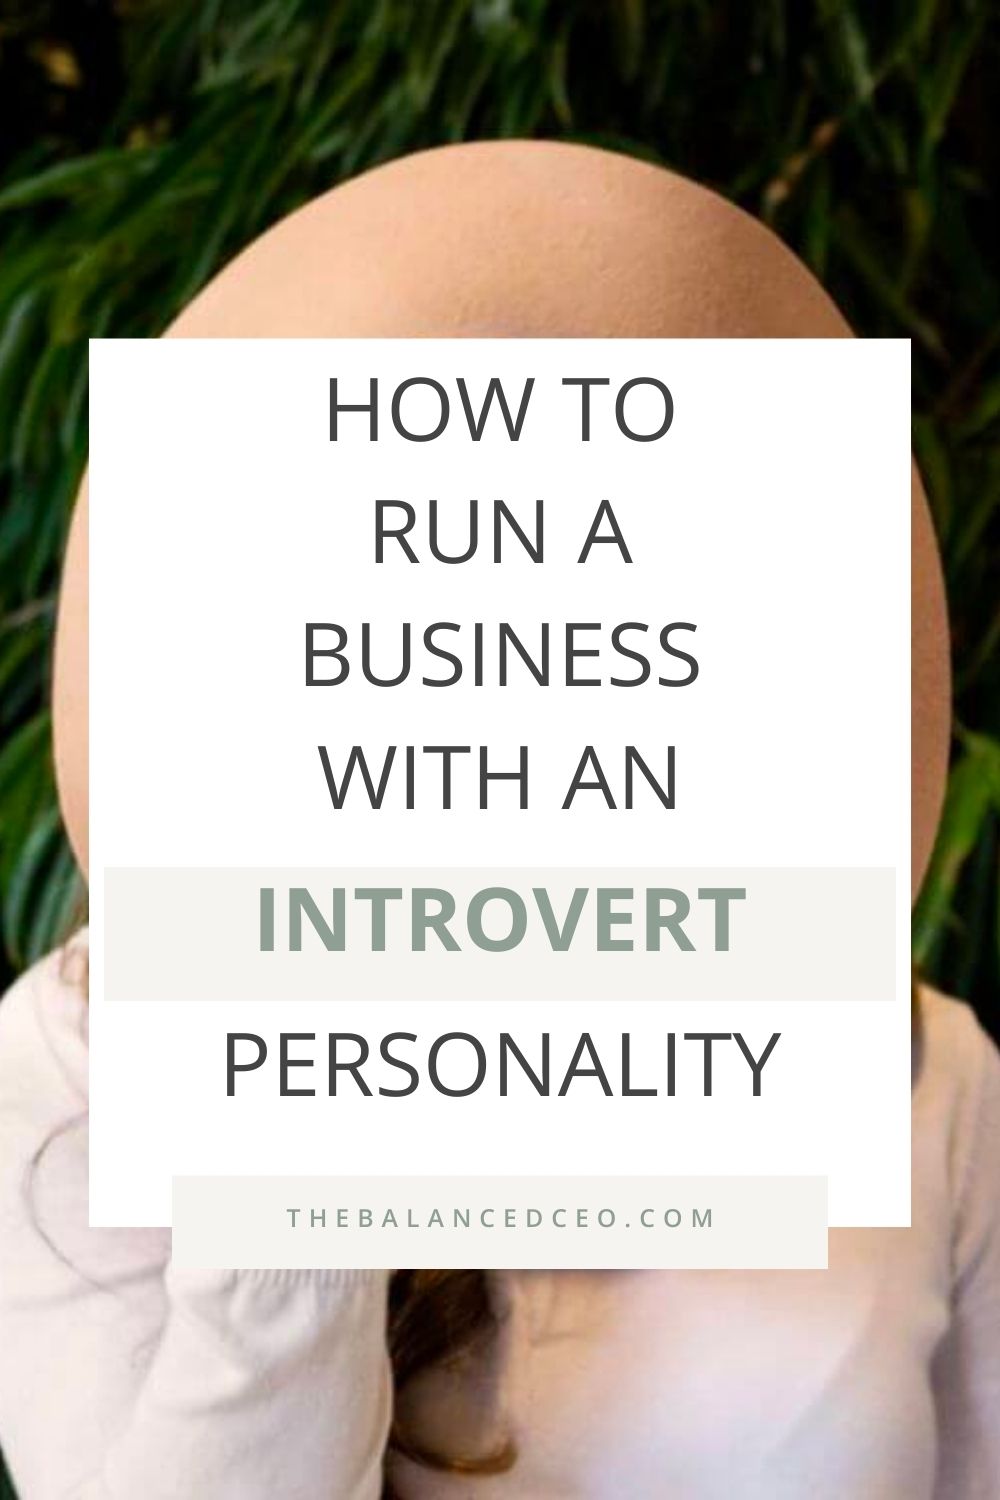 How to Run a Business with an Introvert Personality